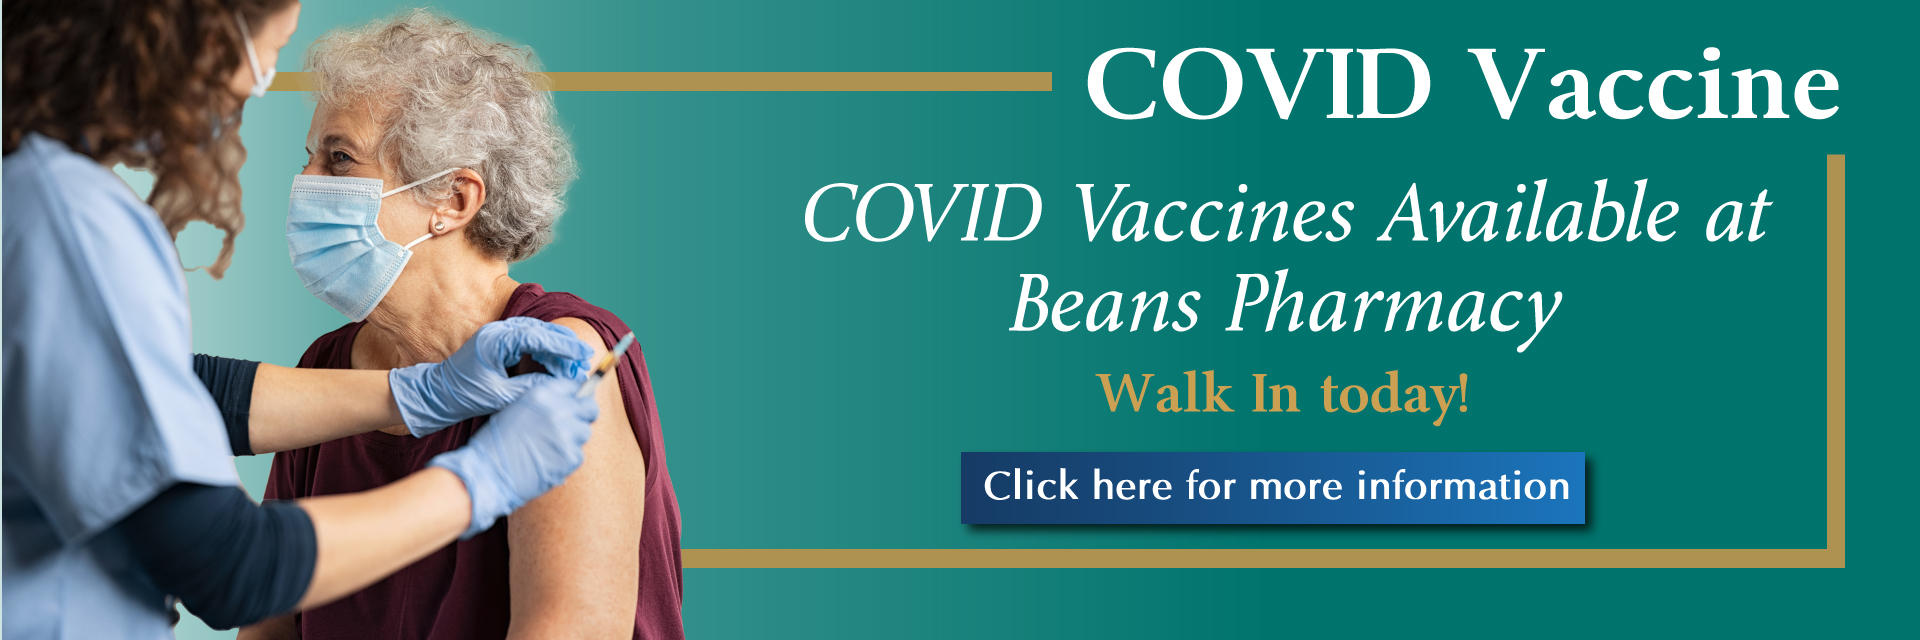 Banner picture of an elderly female patient sitting down and wearing a mask. 
There is a young female Nurse standing up next to her and she is cleaning the patients arm/shoulder so she can be given the Covid Vaccine. The Nurse is wearing a mask, gloves, and holding the COVID shot in her hand. Banner says:
COVID Vaccine
COVID Vaccines Available at Beans Pharmacy
Walk In today!
(Click here for more information)